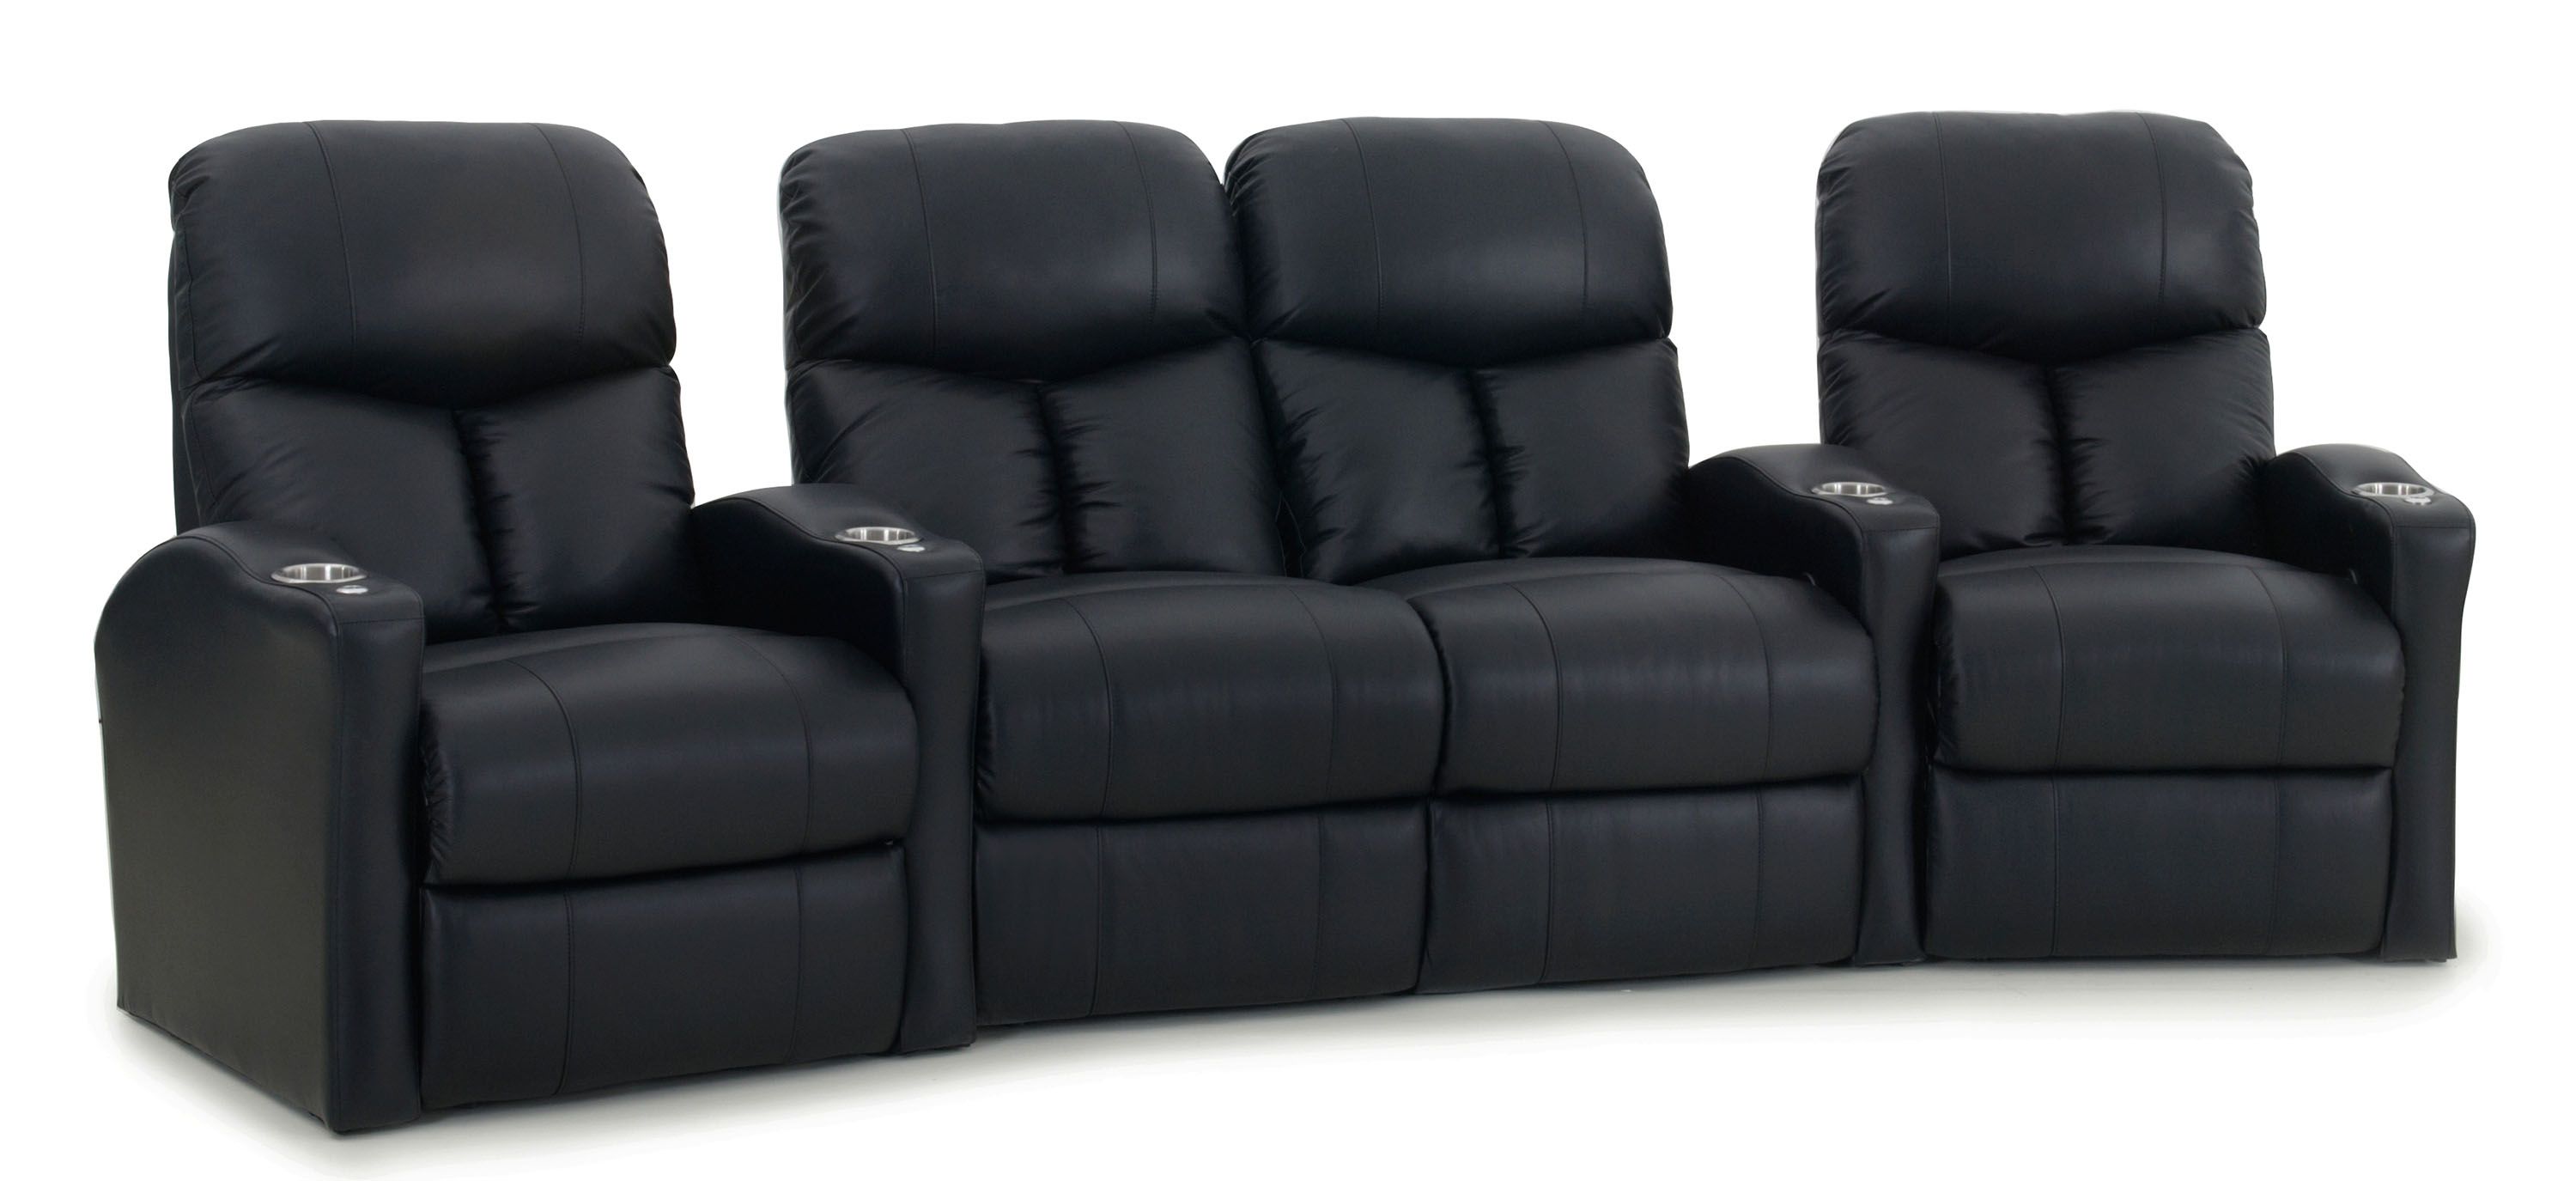 Midway 4-pc. Leather Reclining Sectional Sofa